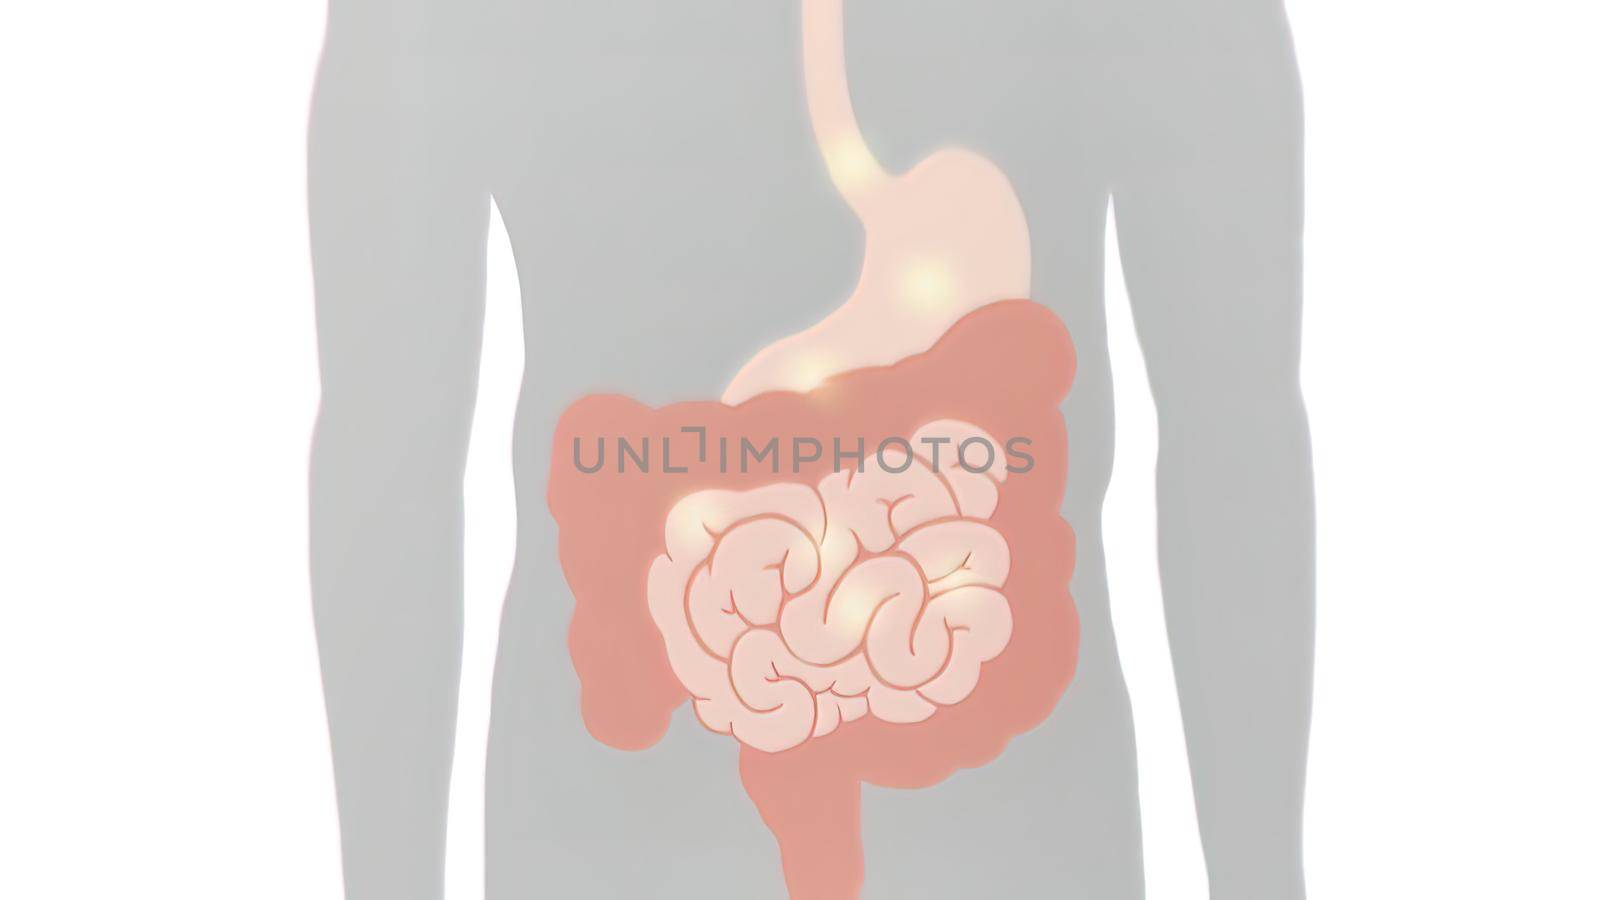 Schematic view of the digestive process in the human digestive system. Journey to the oral digestive system 3D illustration